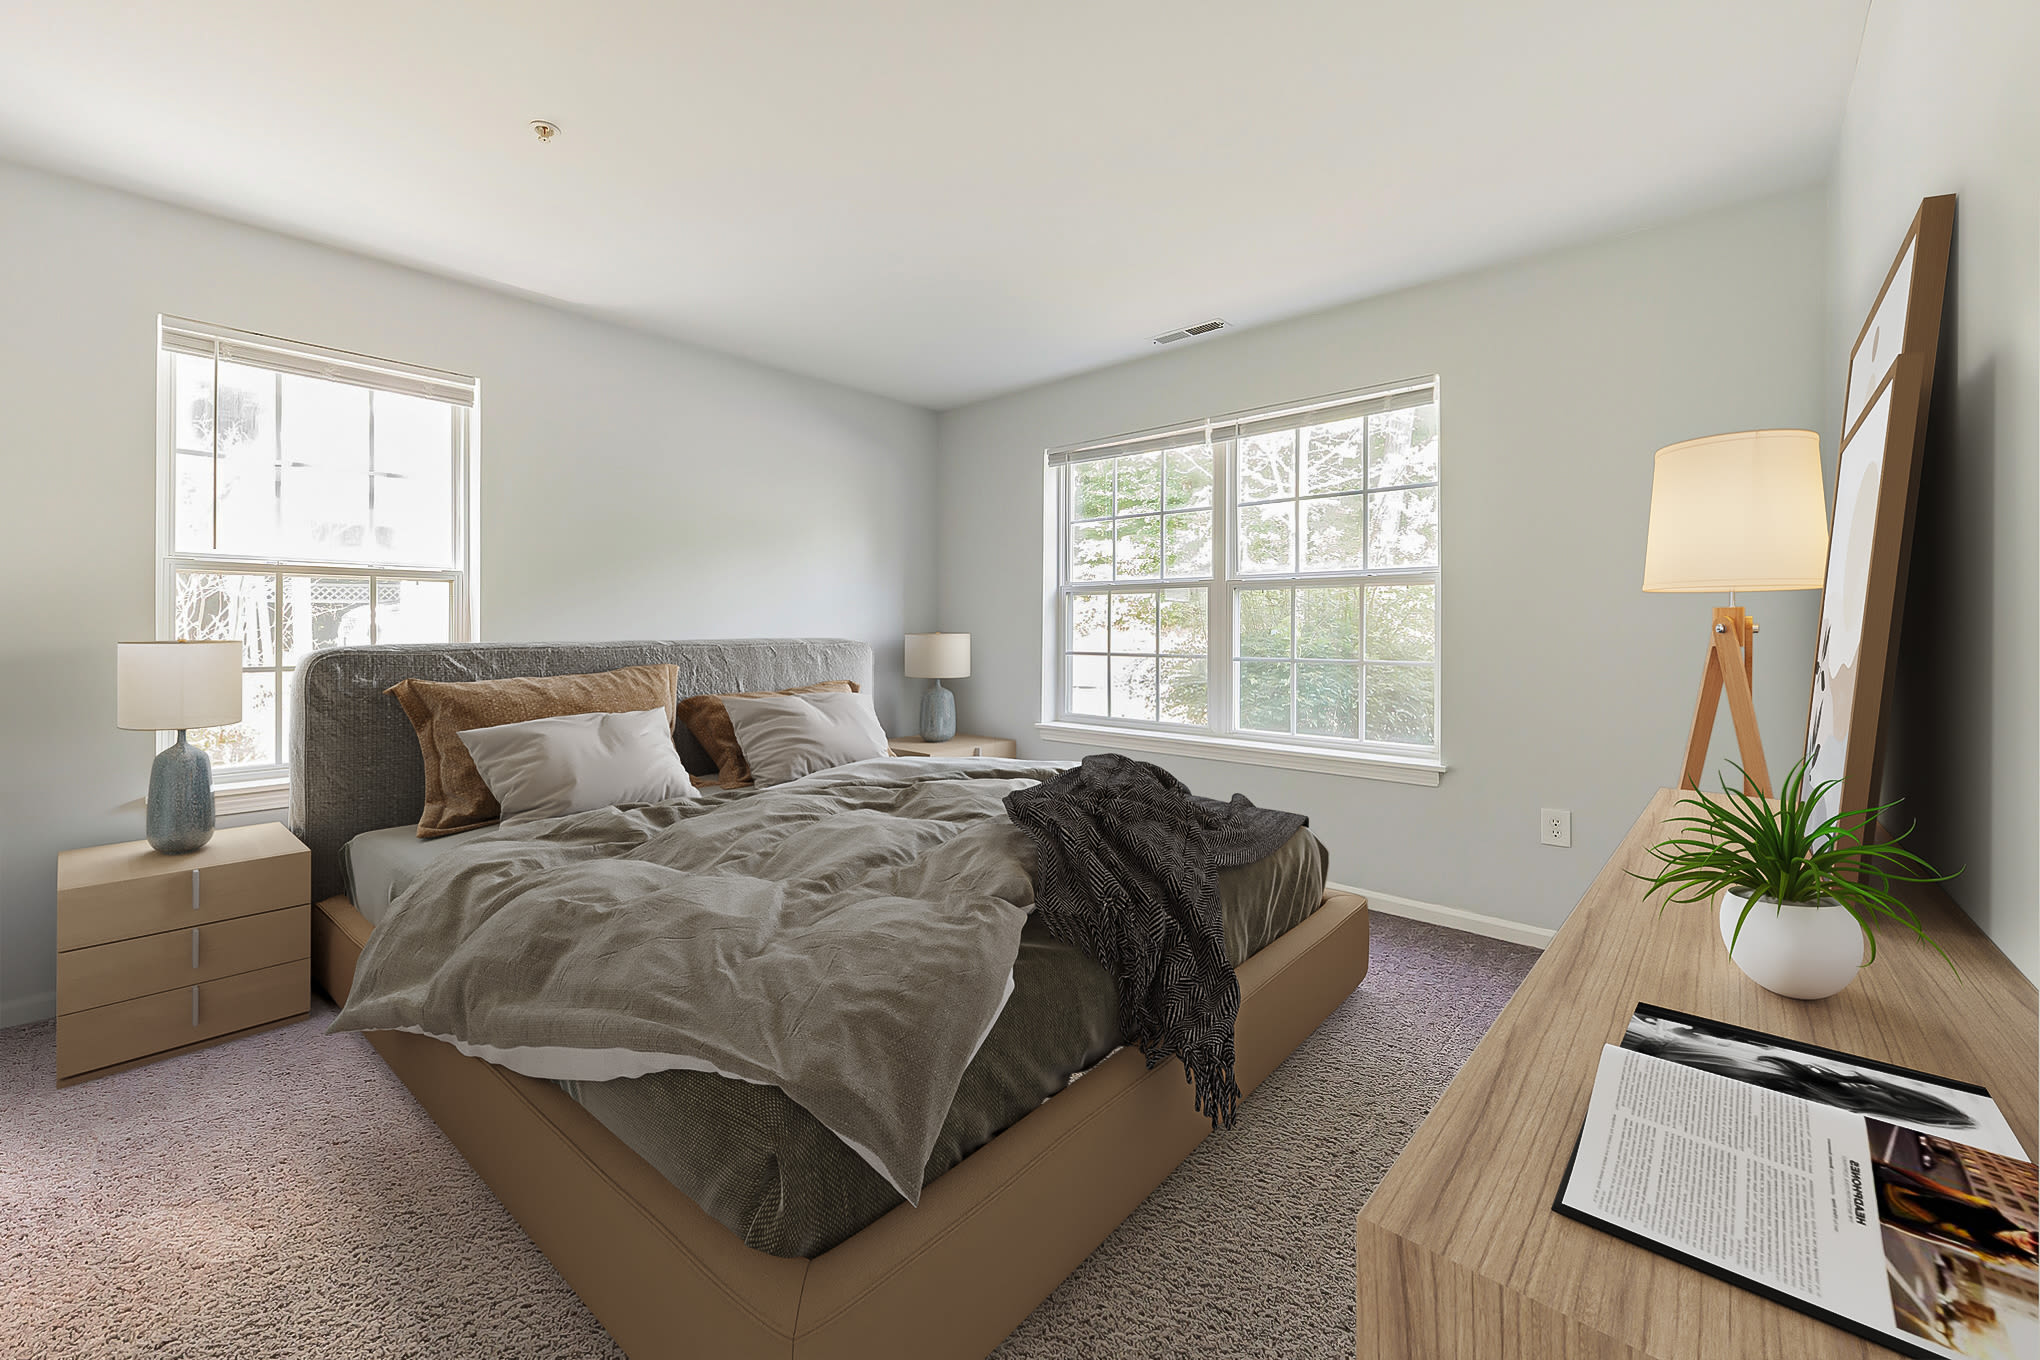 Our Modern Apartments in East Haven, Connecticut showcase a Bedroom